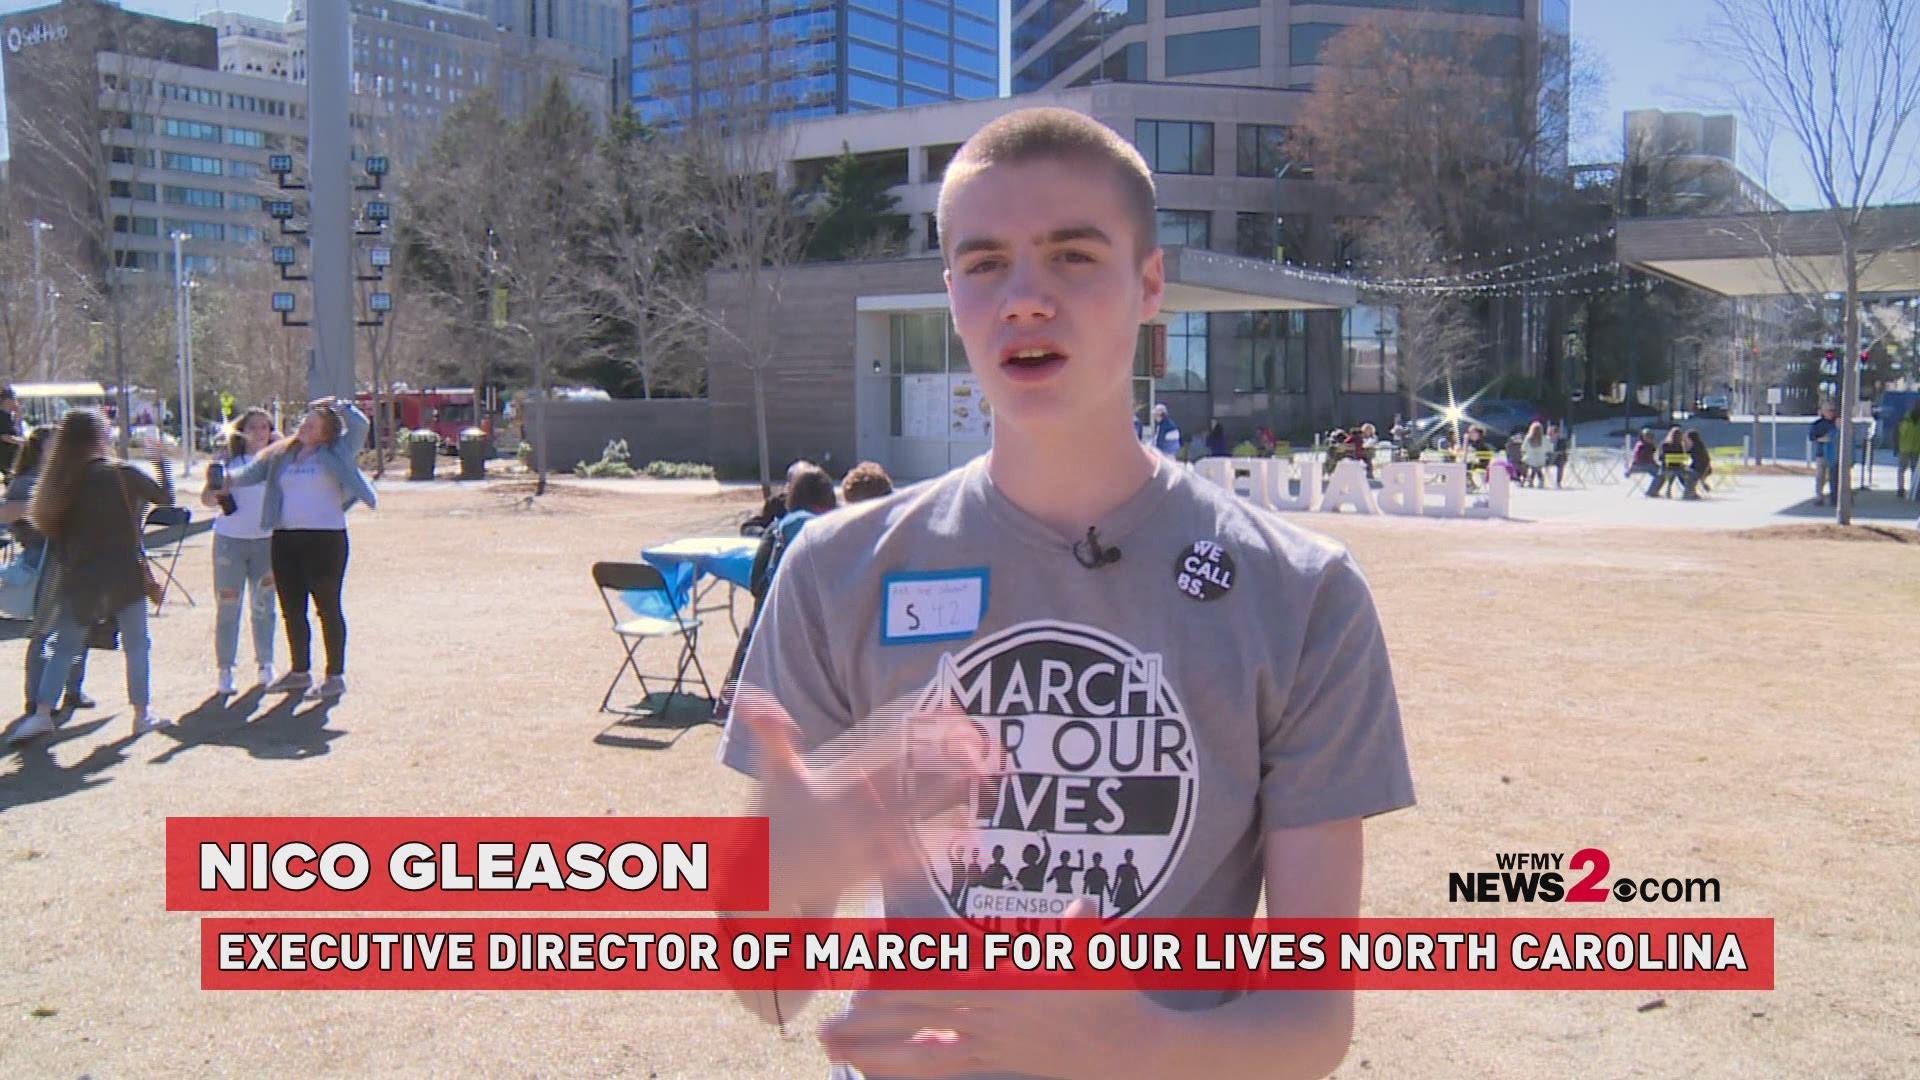 Nico Gleason Executive director of march for our lives North Carolina explains bill s.42